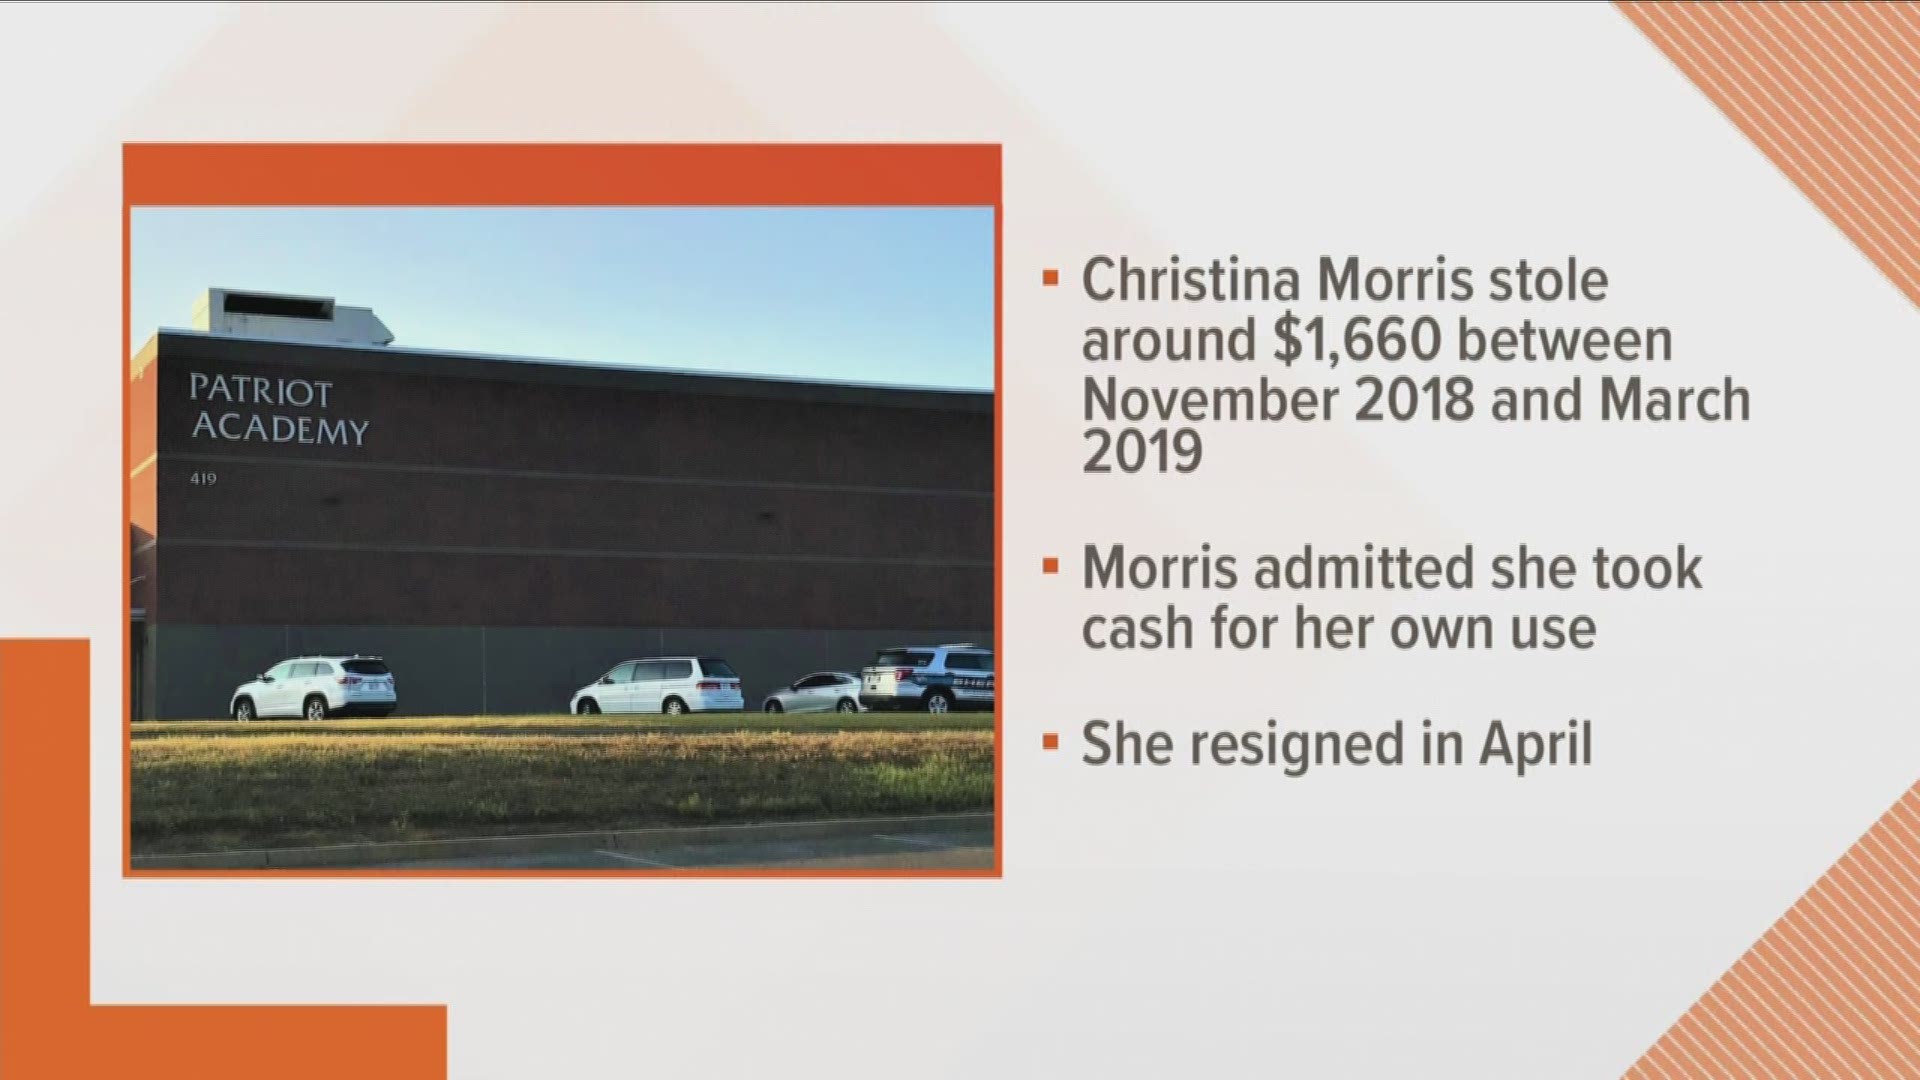 She told authorities she was holding onto cash for herself before resigning on April 11.